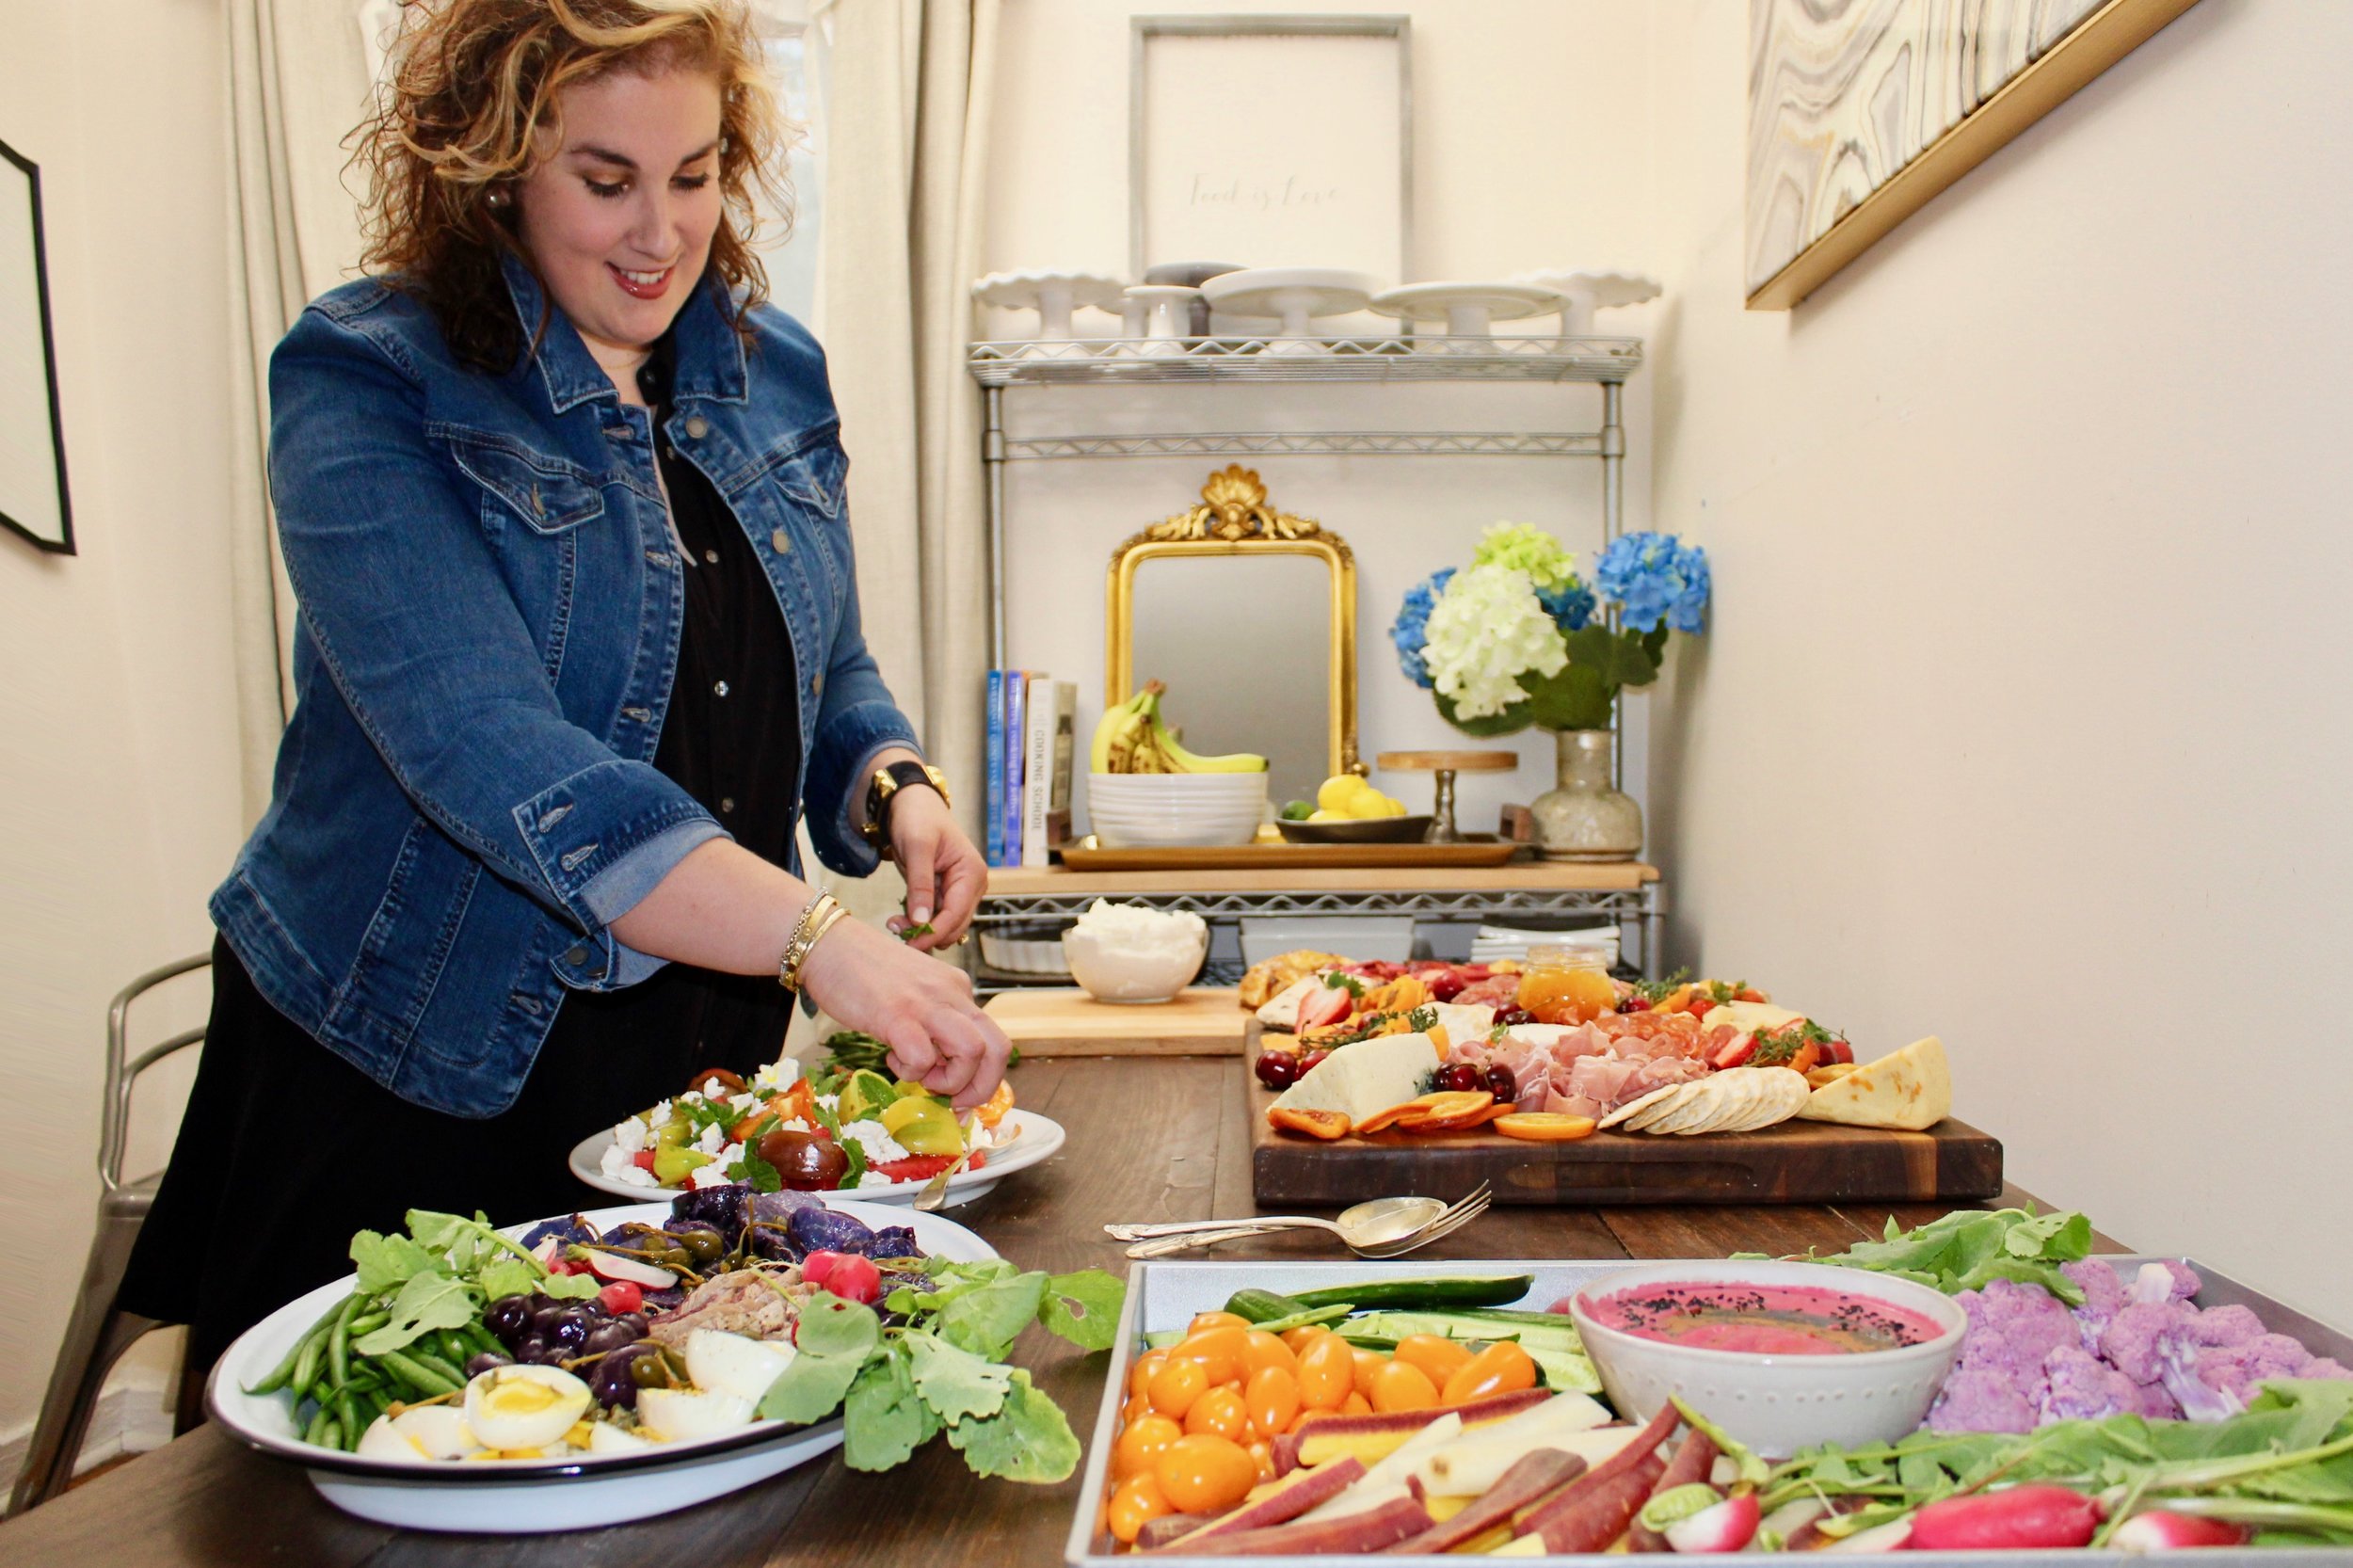   Personal chef Nicole Uliano putting the finishing touches on a spread. Her presentations’ bold contrasting colors have eye appeal, and fresh ingredients and flavor combinations take care of the rest.  